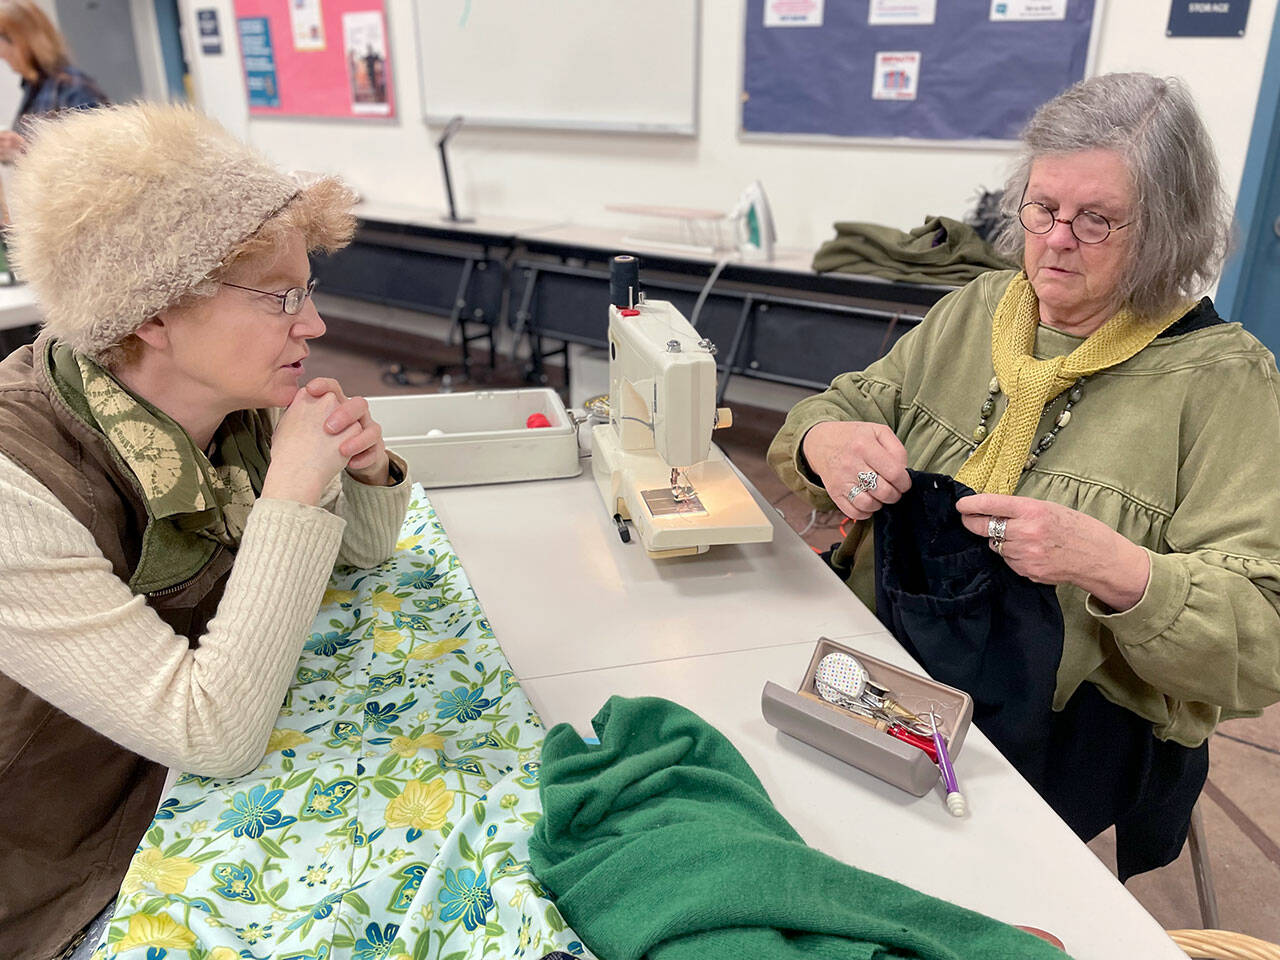 Loran Scruggs, left, brought a green cashmere sweater, a pair of floral silk pants and a pair of black cotton pants that needed to be mended to the Port Townsend Marine Science Center’s Repair Cafe. Paula Lalish was one of three volunteers on hand to assist people by fixing clothing that had holes, rips, tears and and broken zippers. (Paula Hunt/Peninsula Daily News)